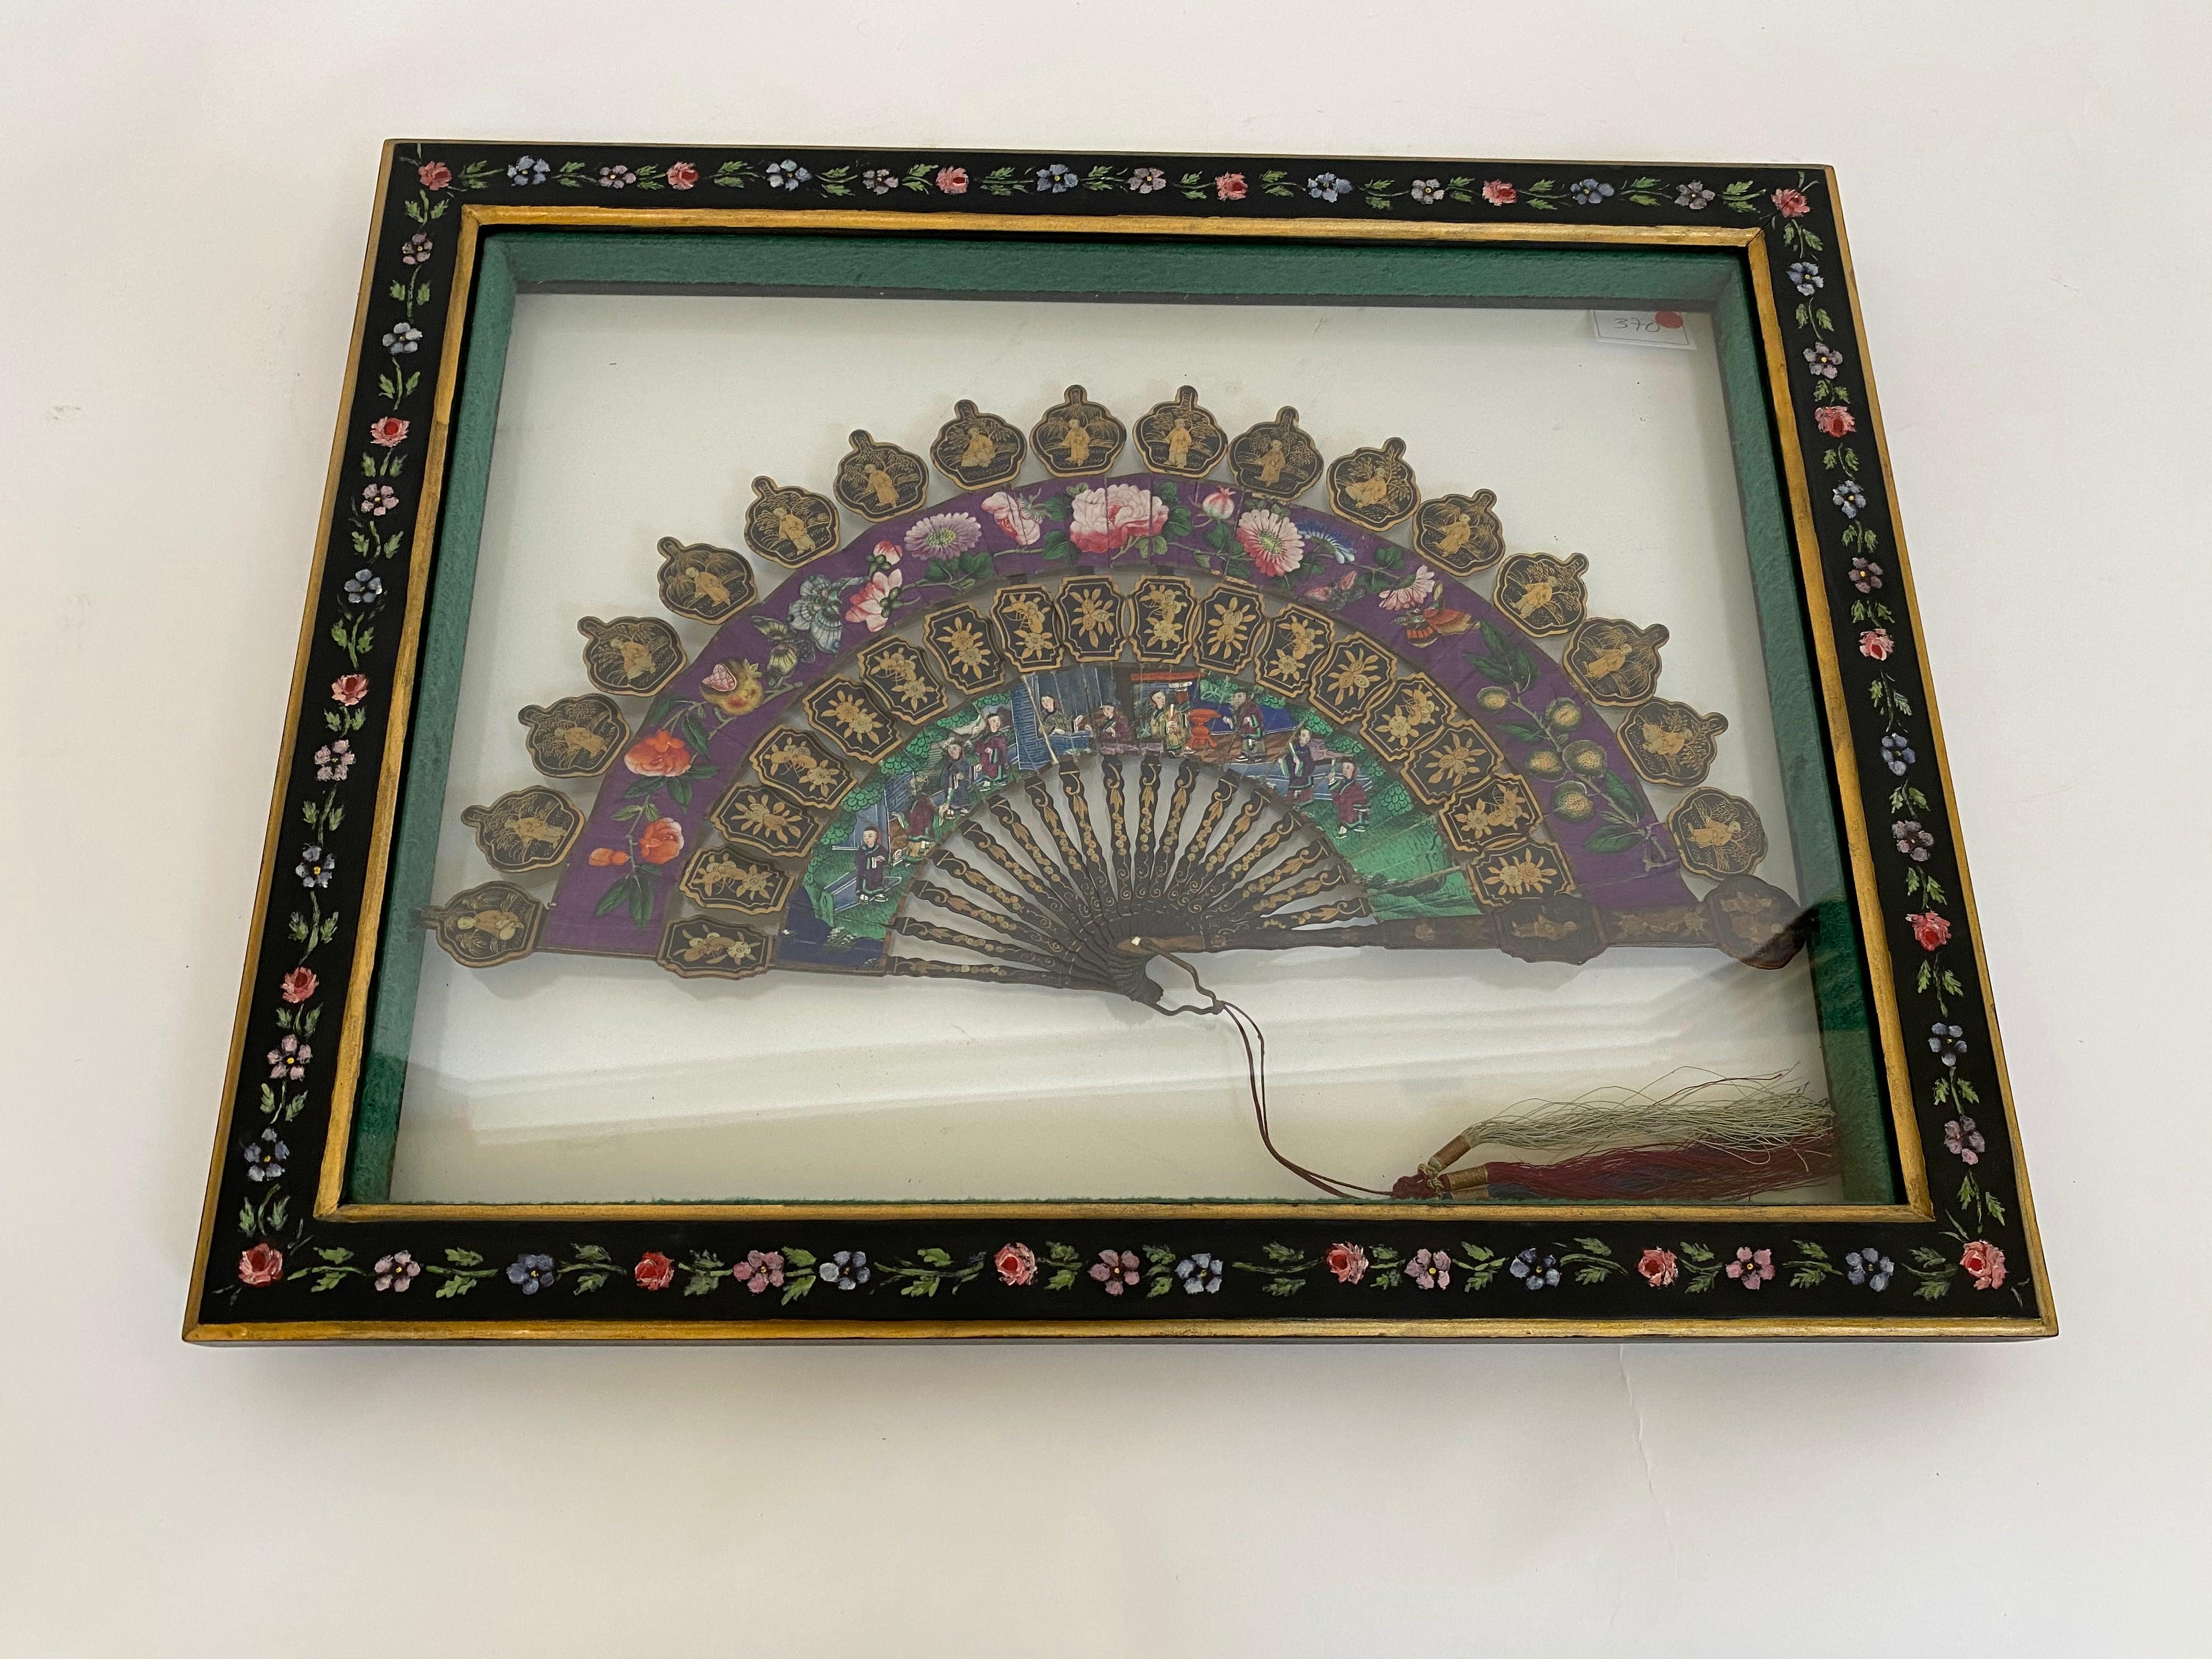 19th century Chinese lacquered and giltwood frame fan with chinoiserie decoration double leaf depicting Chinese daily scenes, animals and flowers with original case and framed, minor loses and faults, very beautiful and good condition.